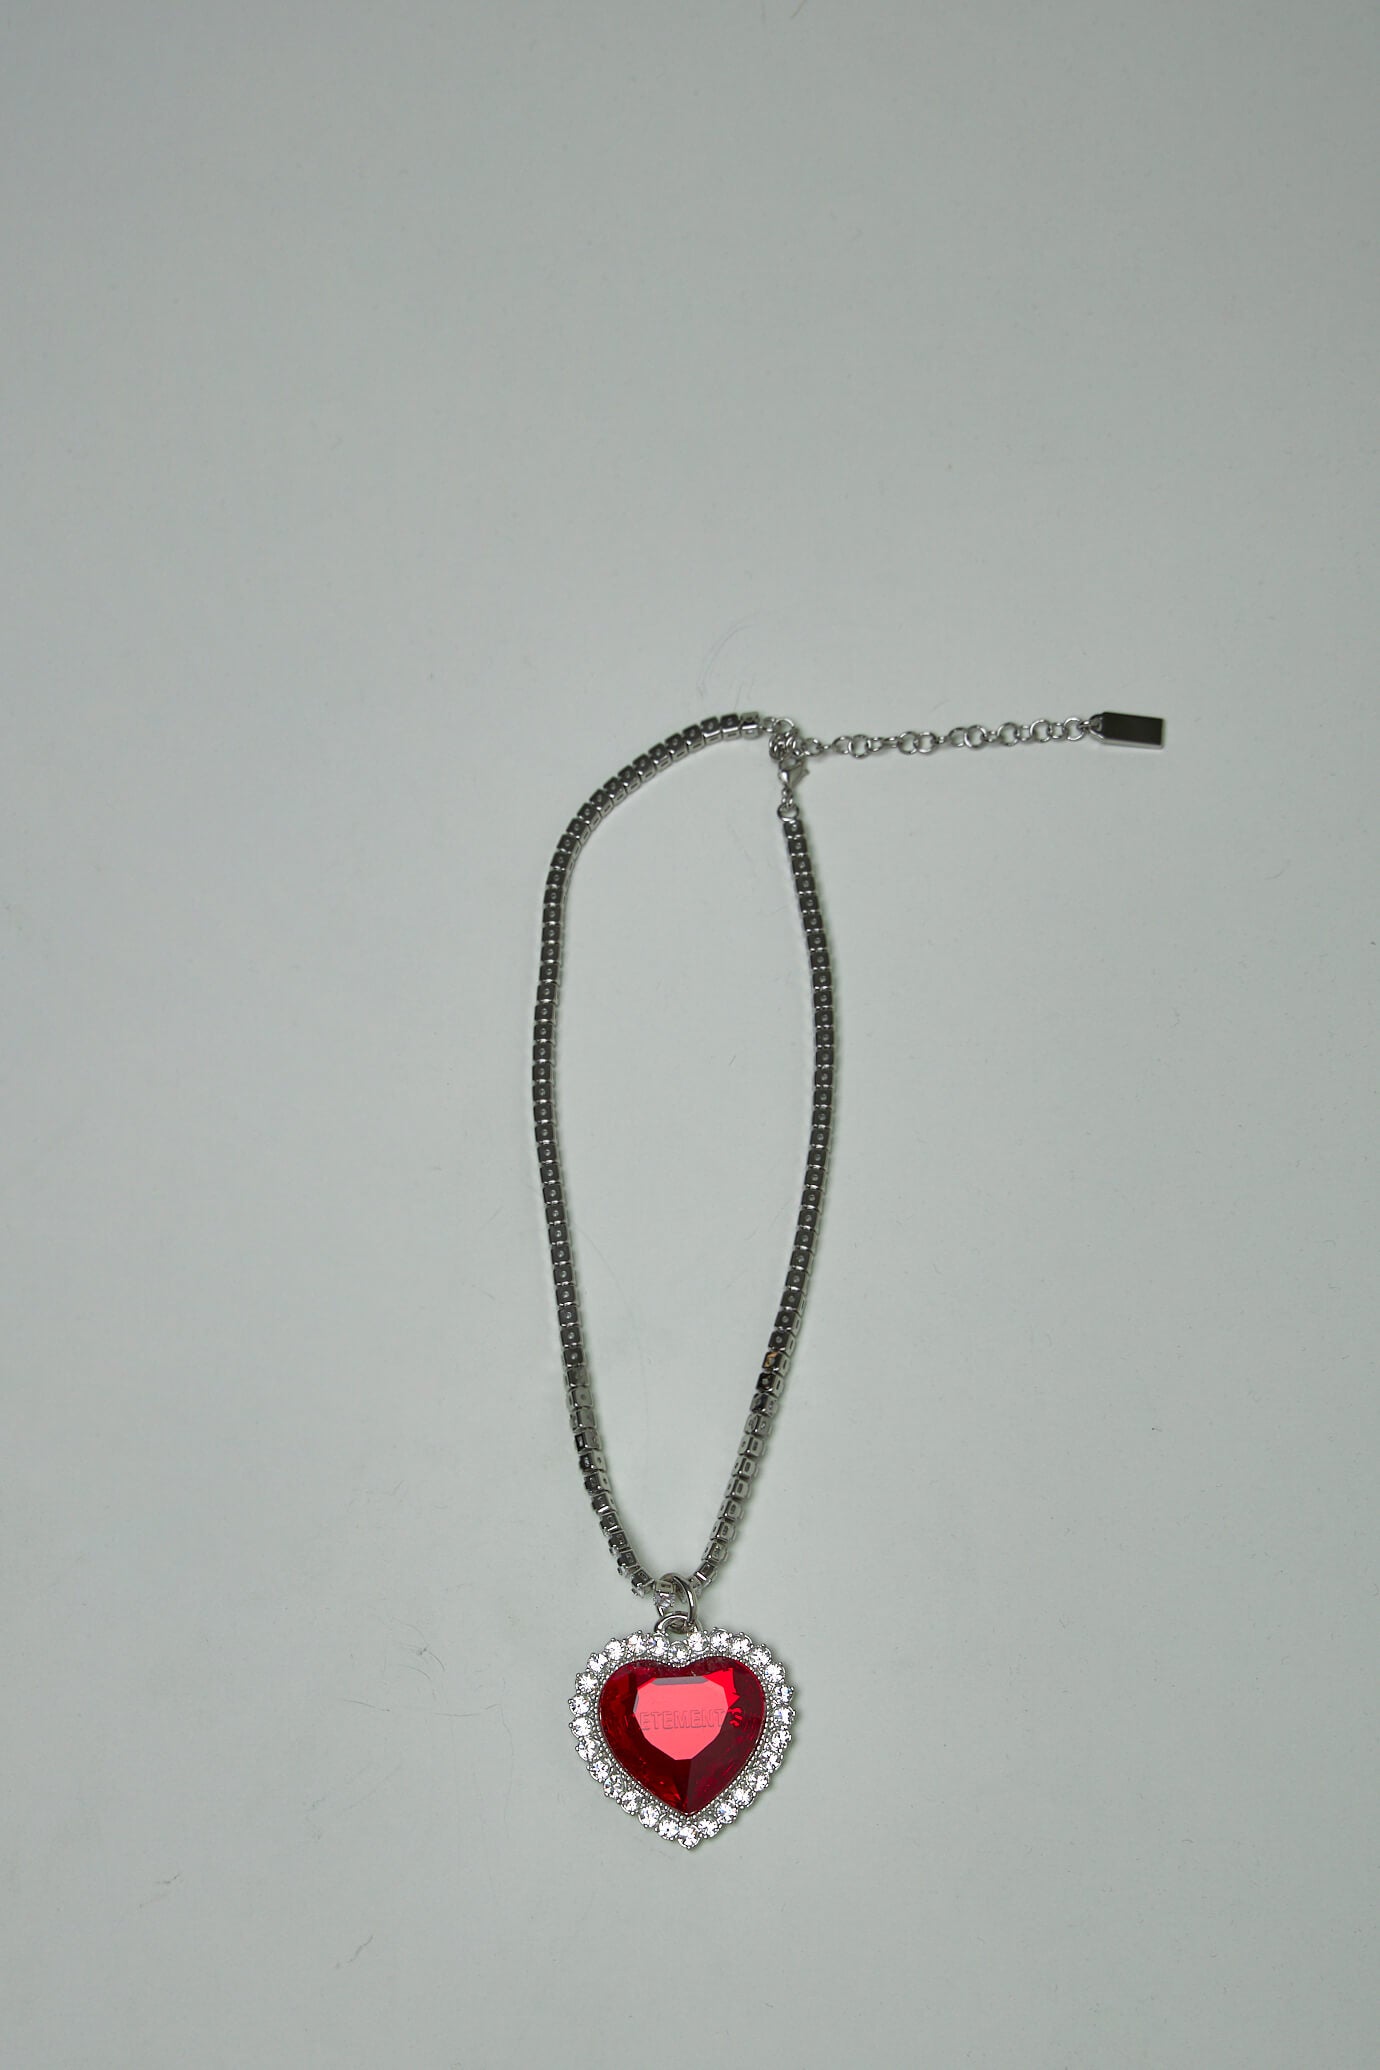 Vetements Crystal Heart Necklace